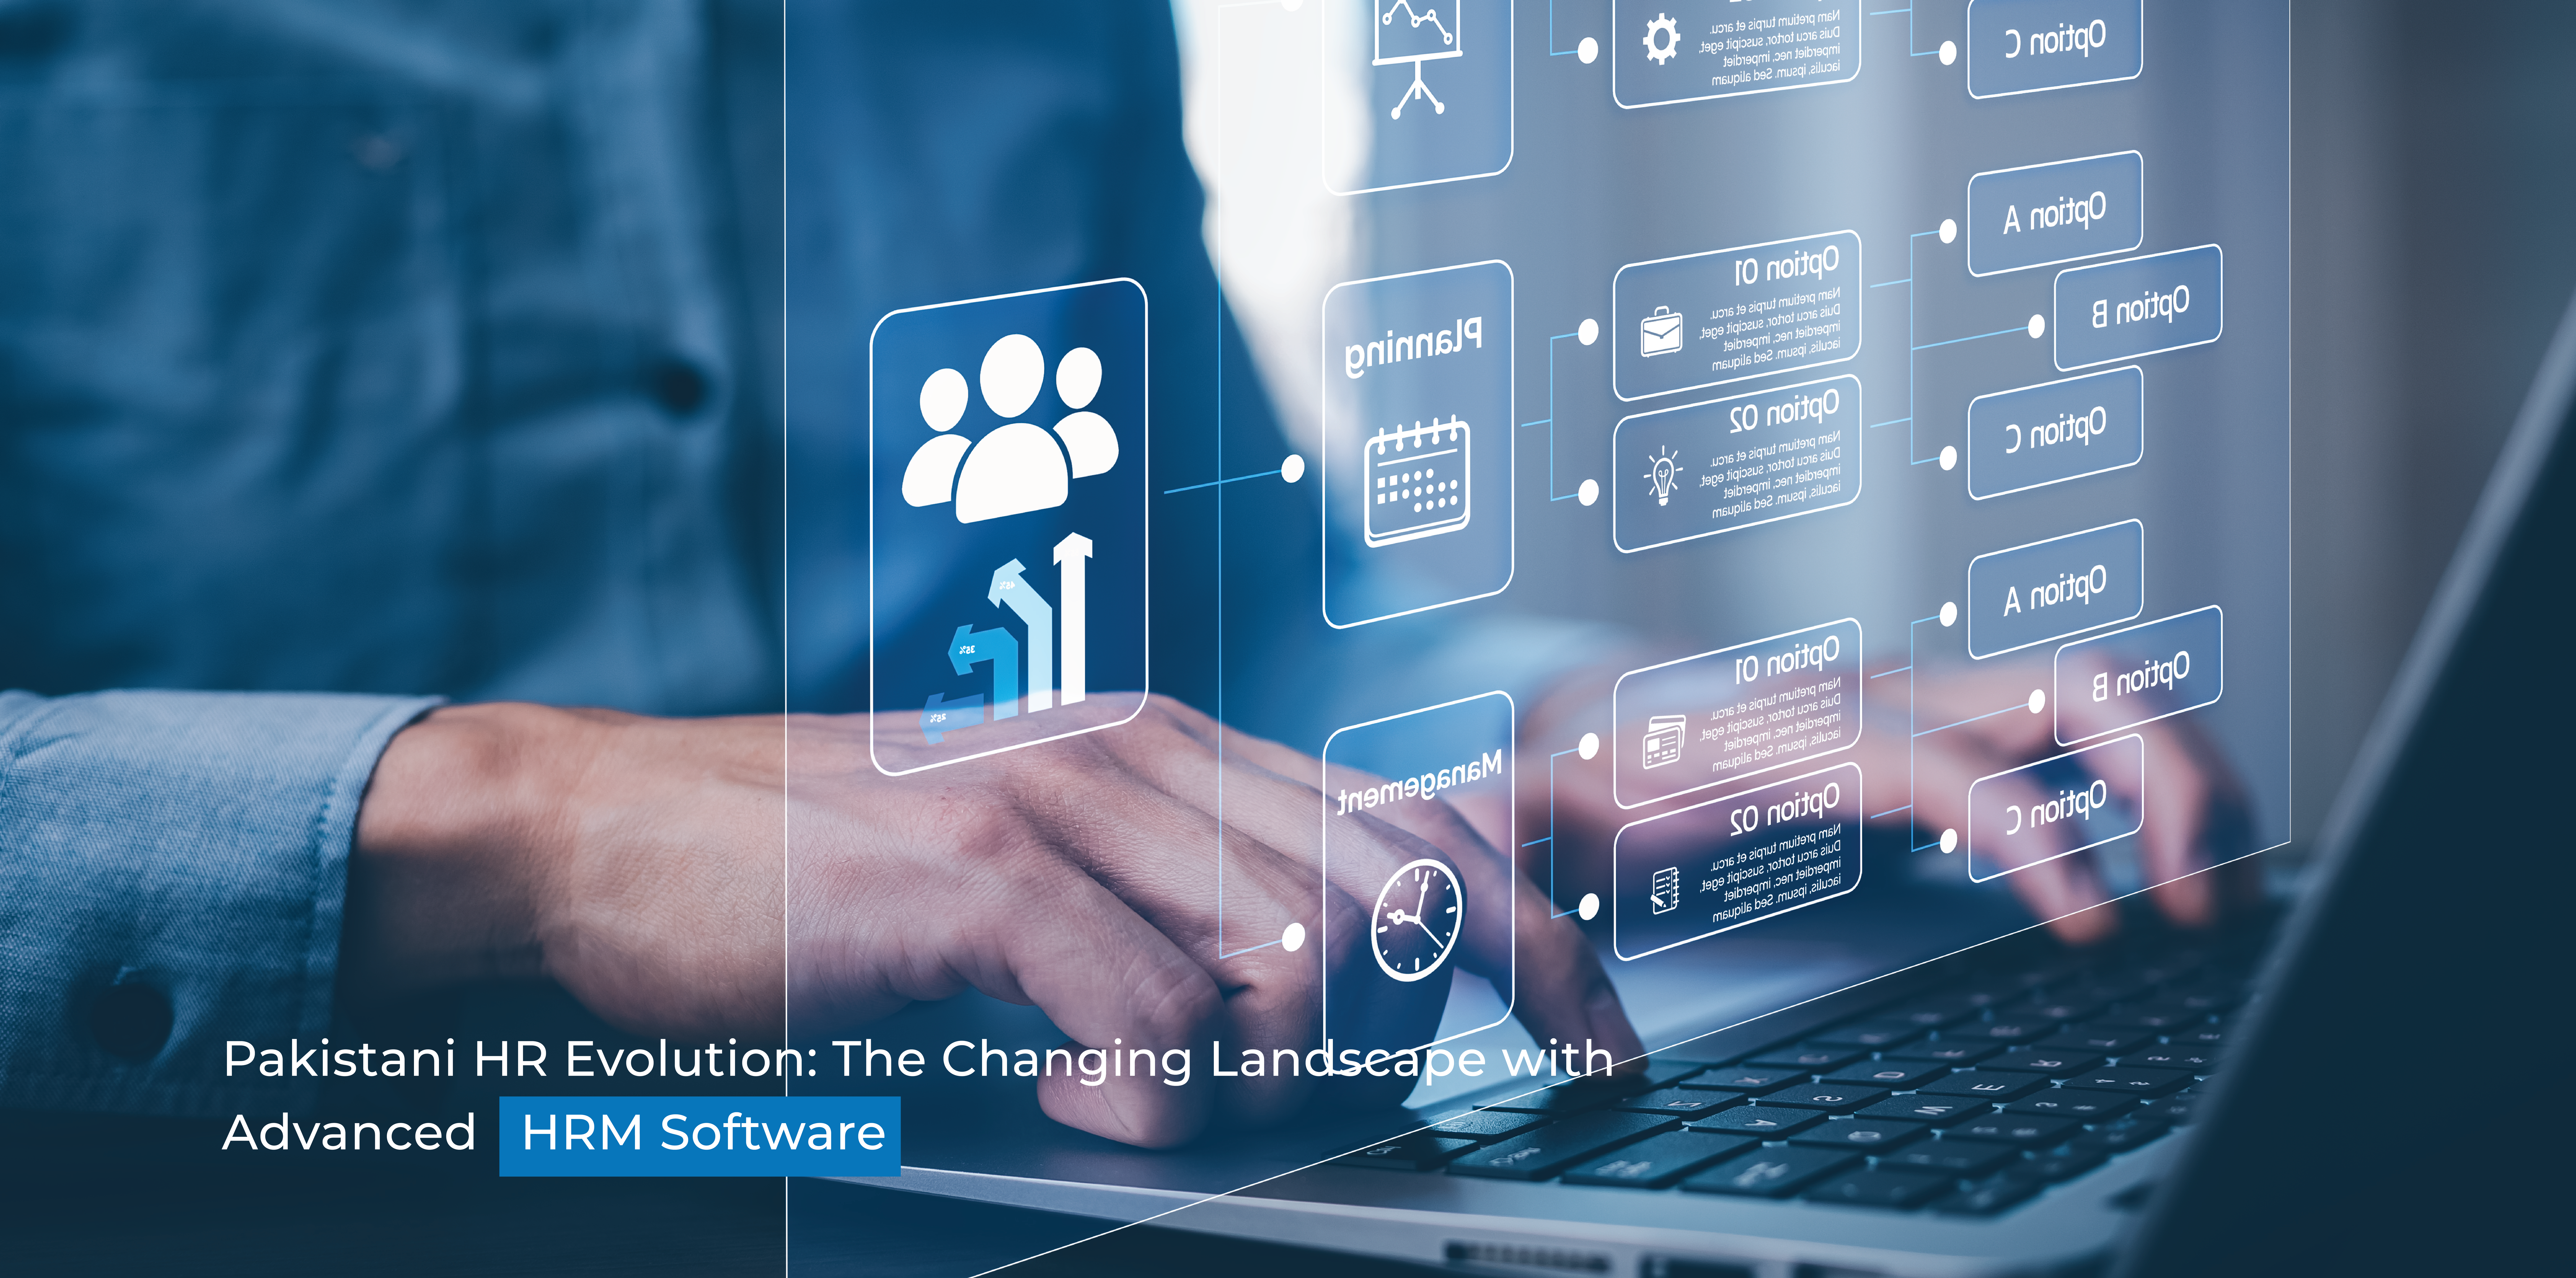 Pakistani HR Evolution: The Changing Landscape with Advanced HRM Software